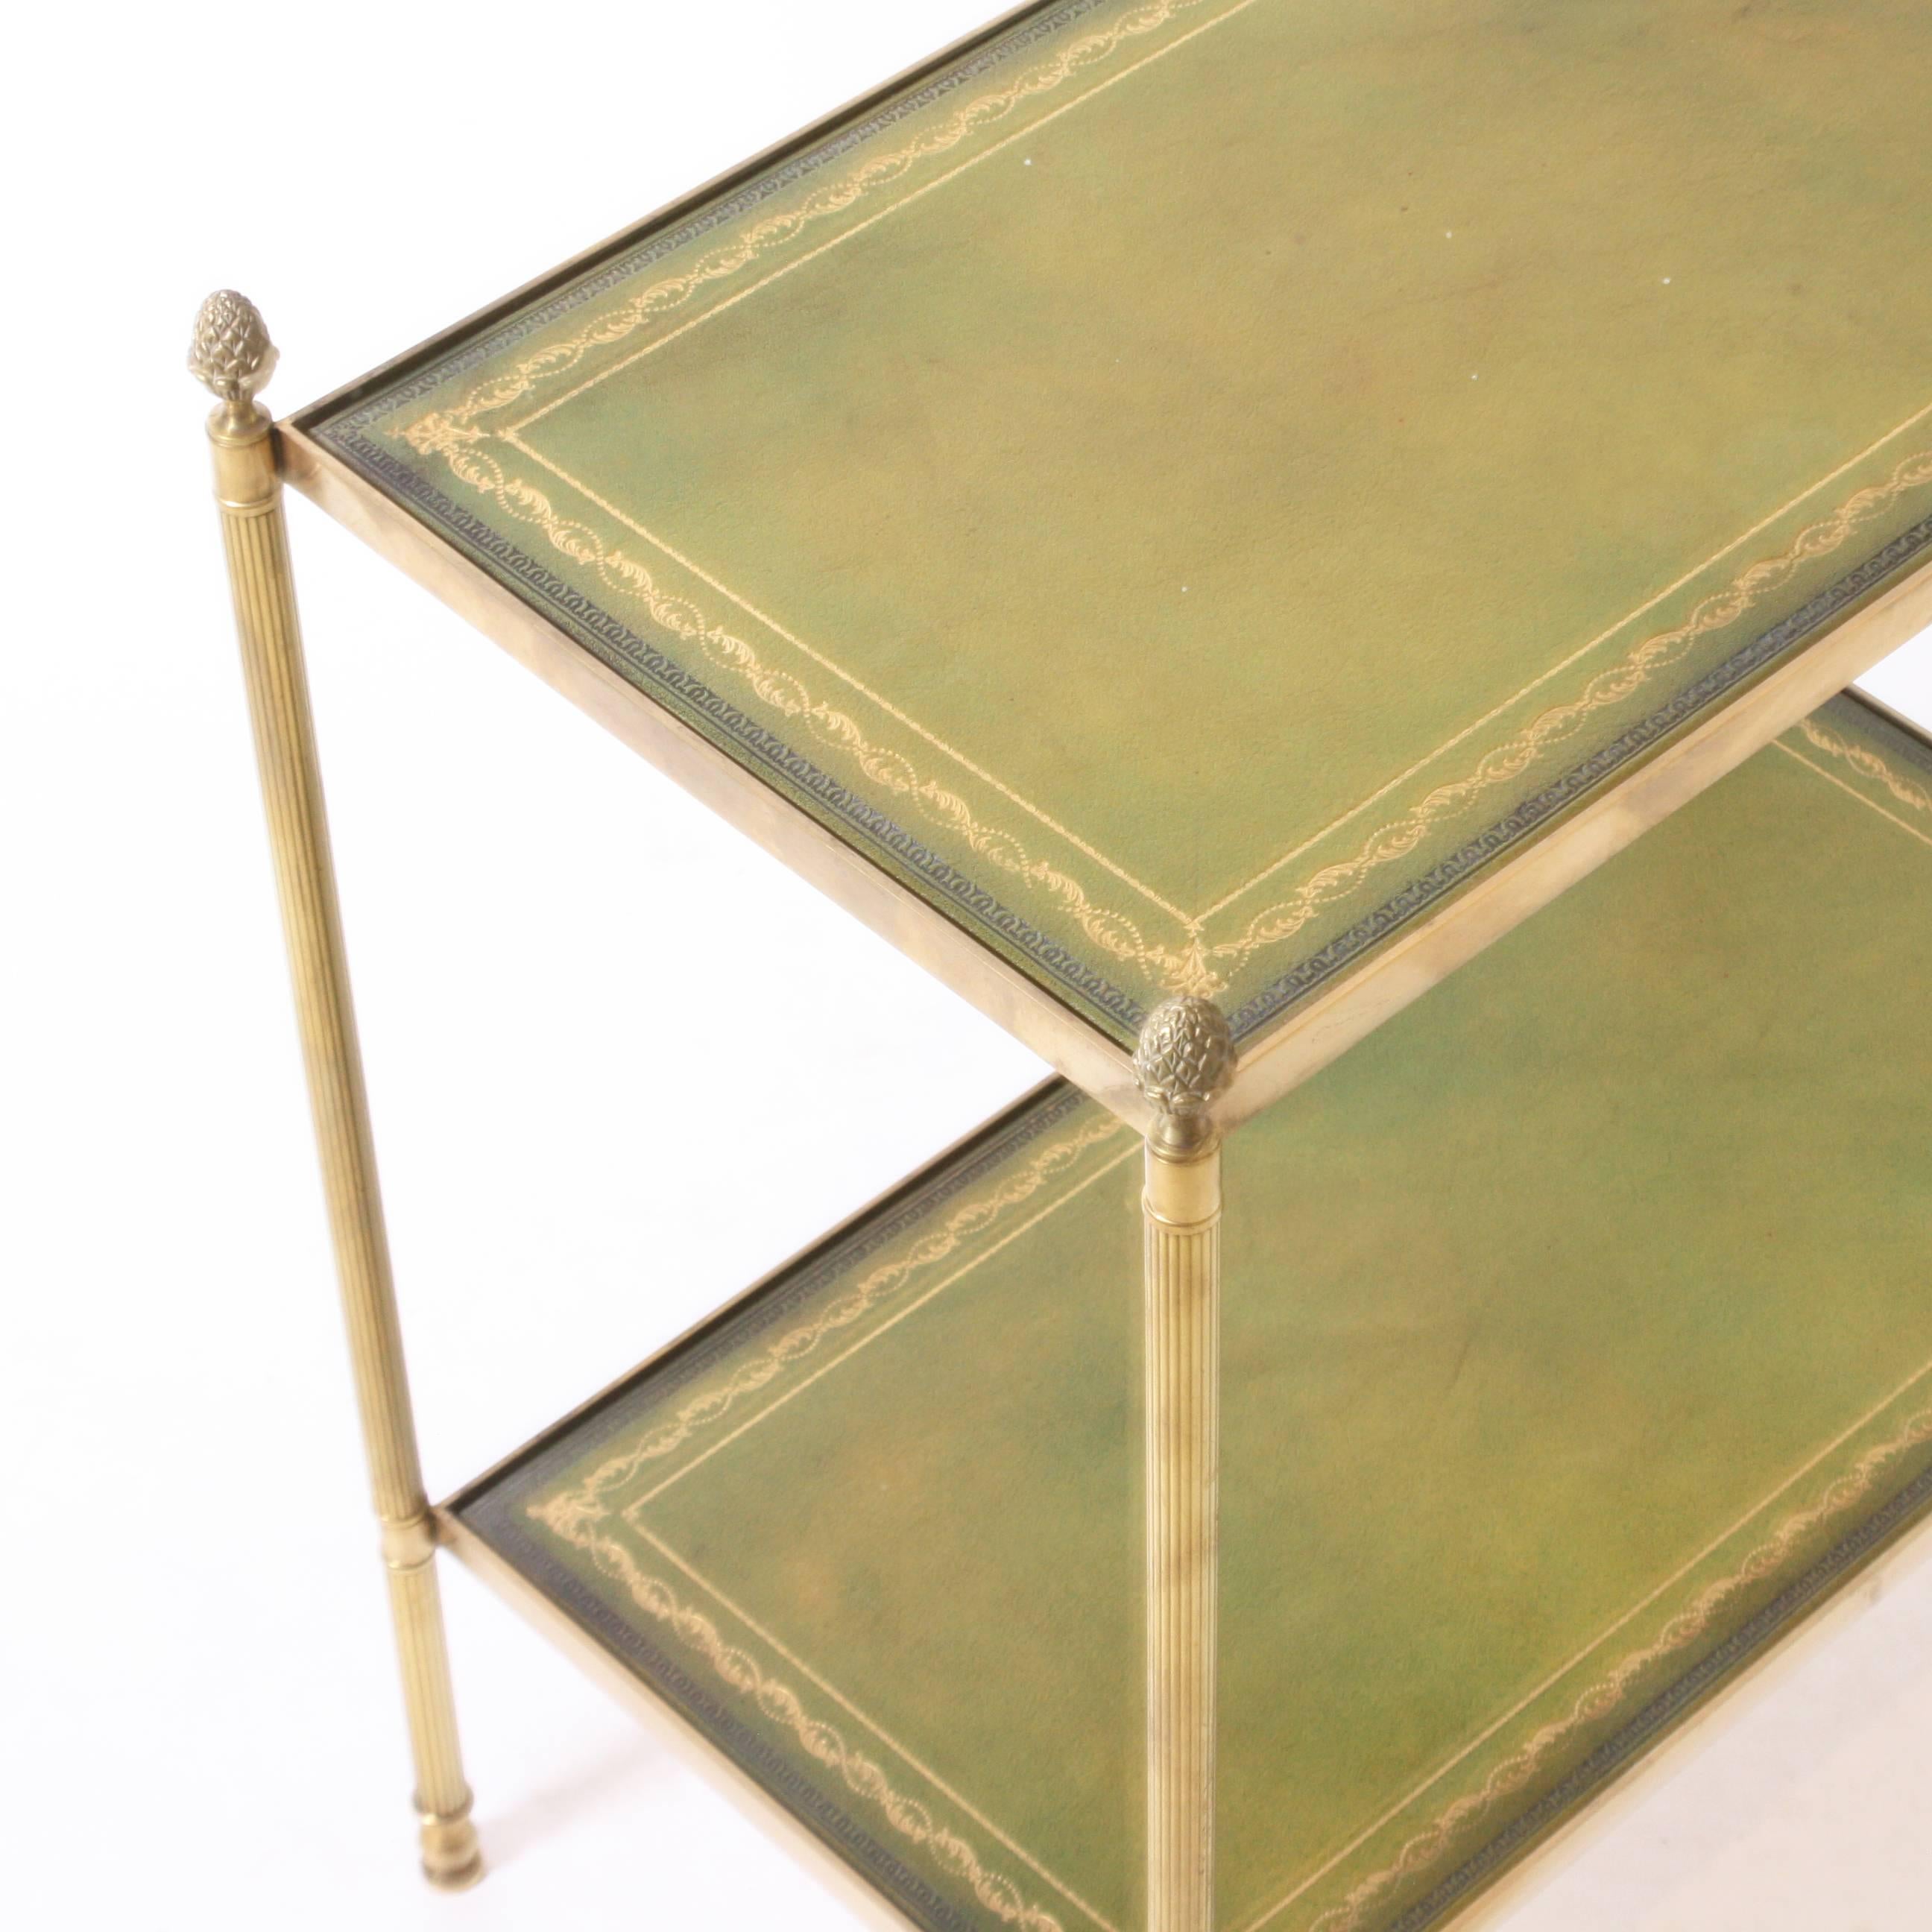 Pair of bronze side tables with original green leather tops in the style of Jansen, circa 1940.